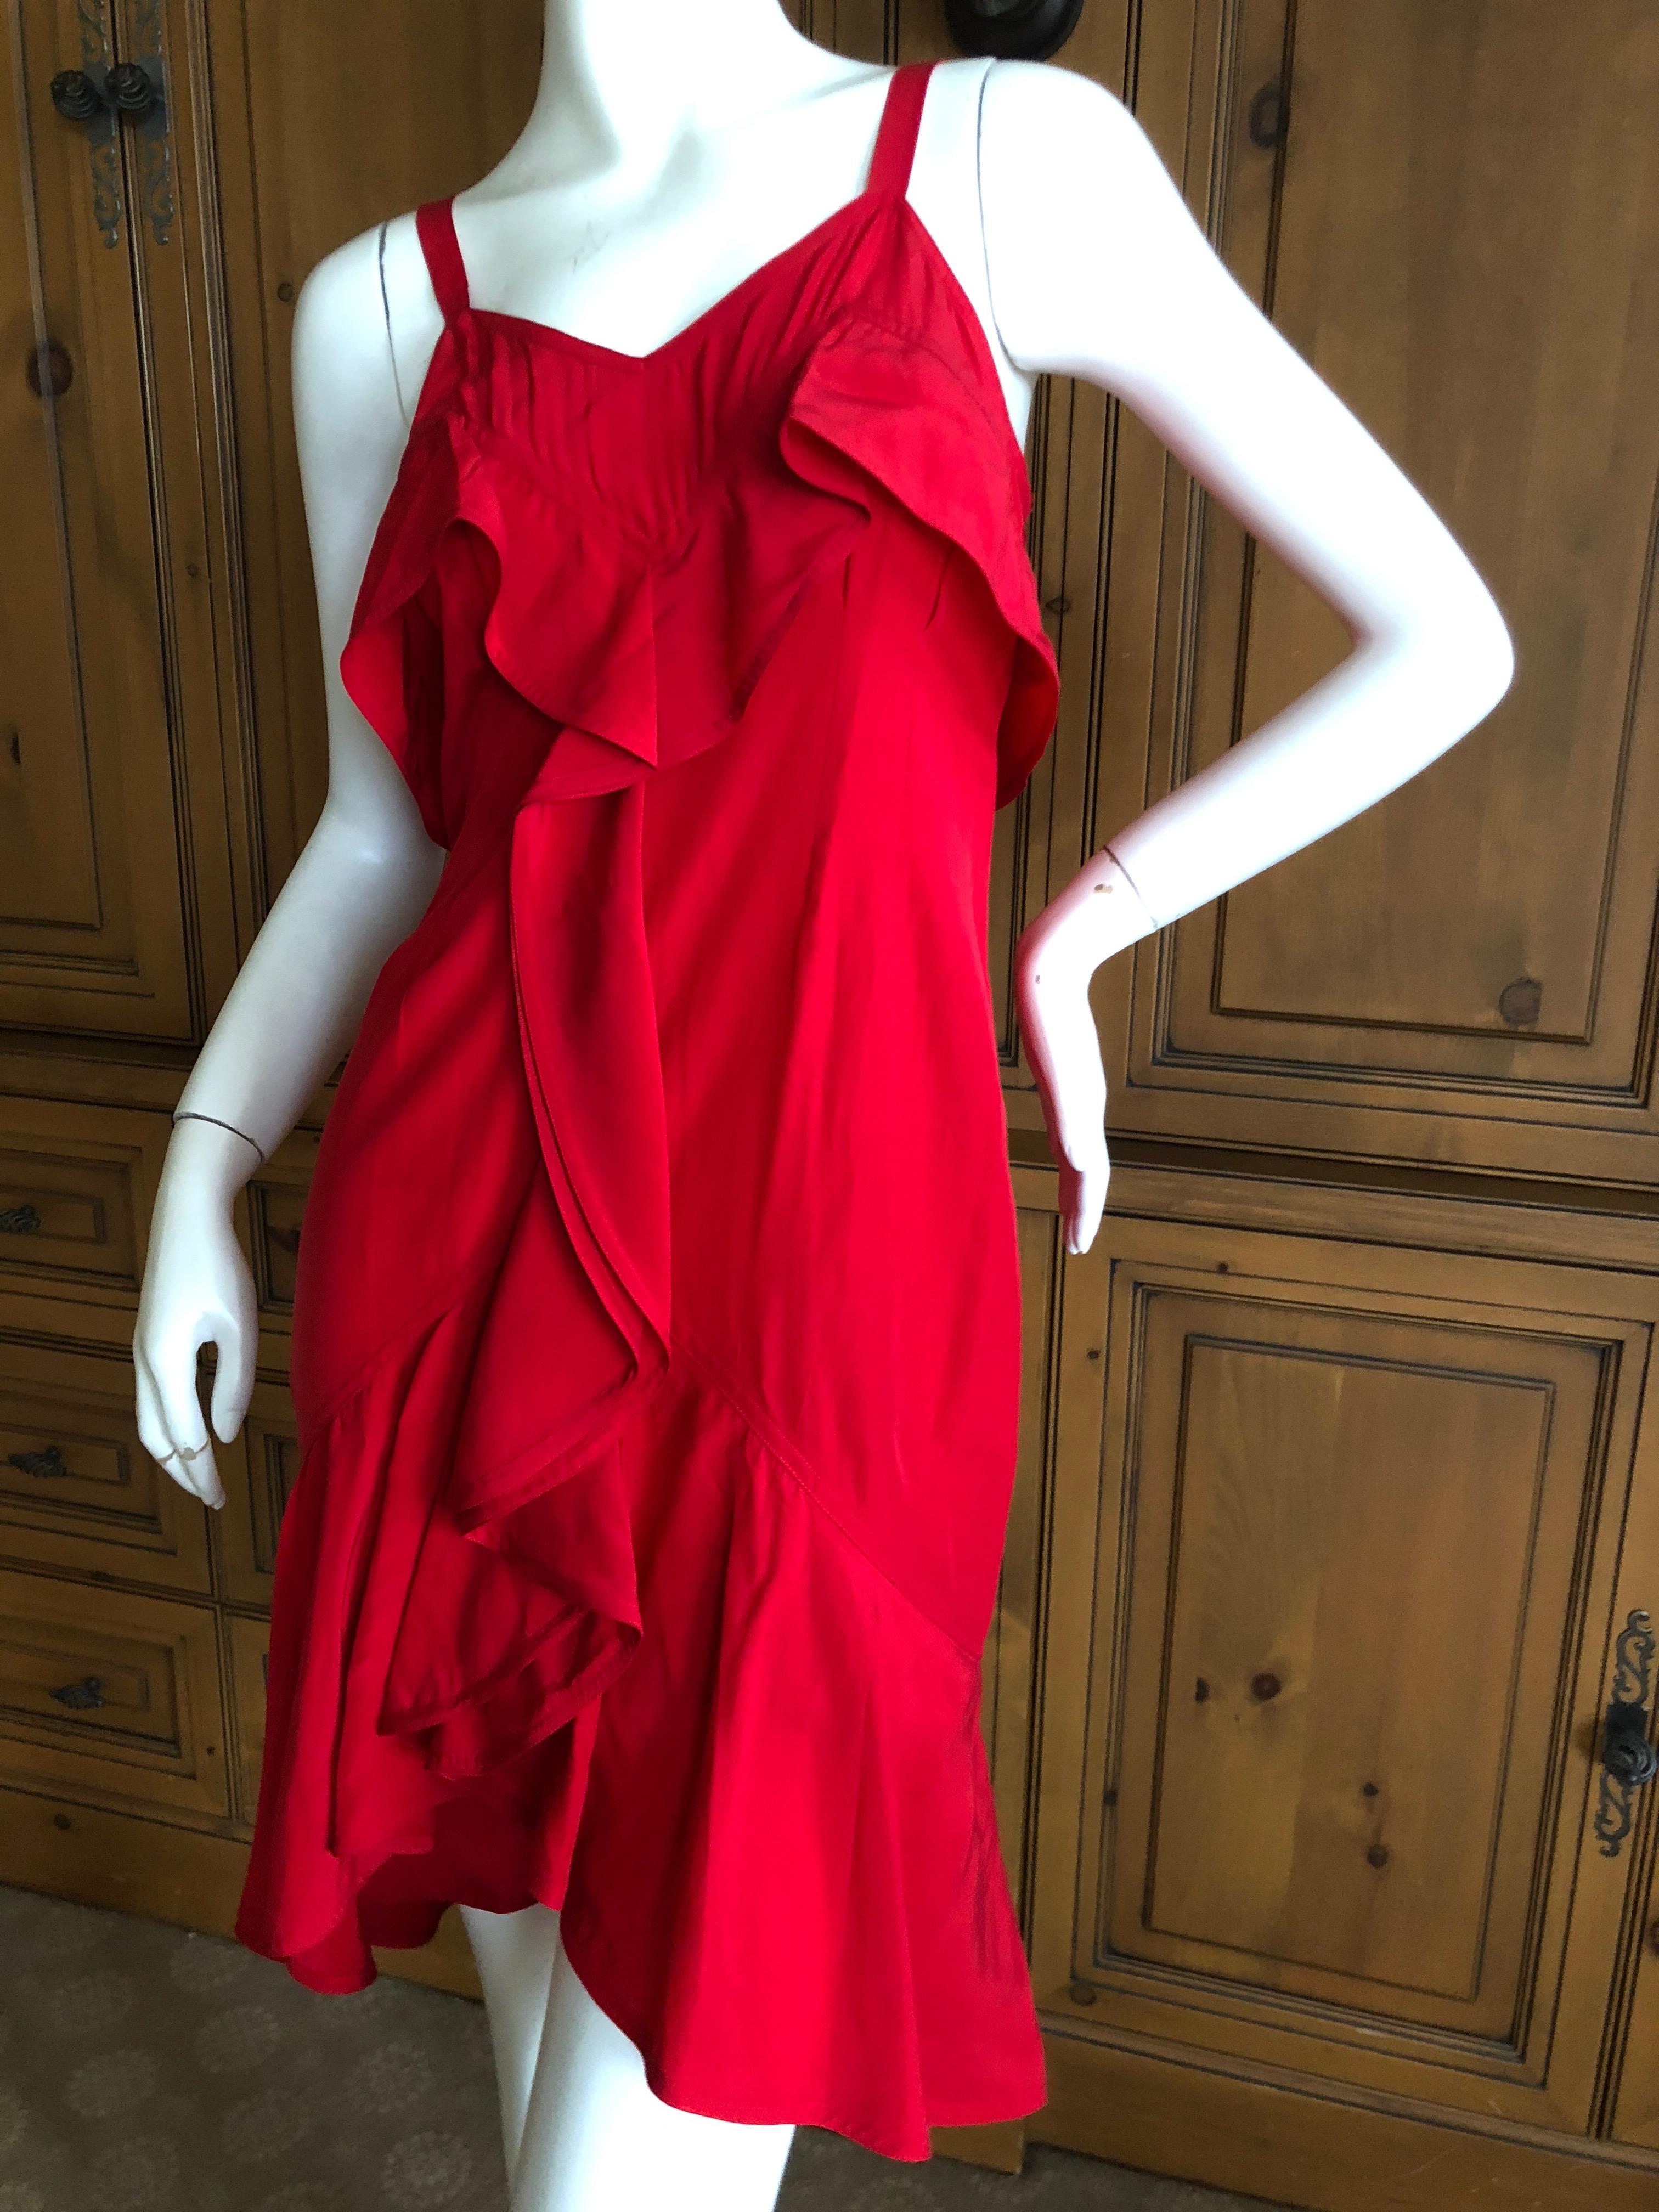 Yves Saint Laurent Tom Ford Fall 2003 Look 1 Red Ruffle Silk Dress For Sale 1